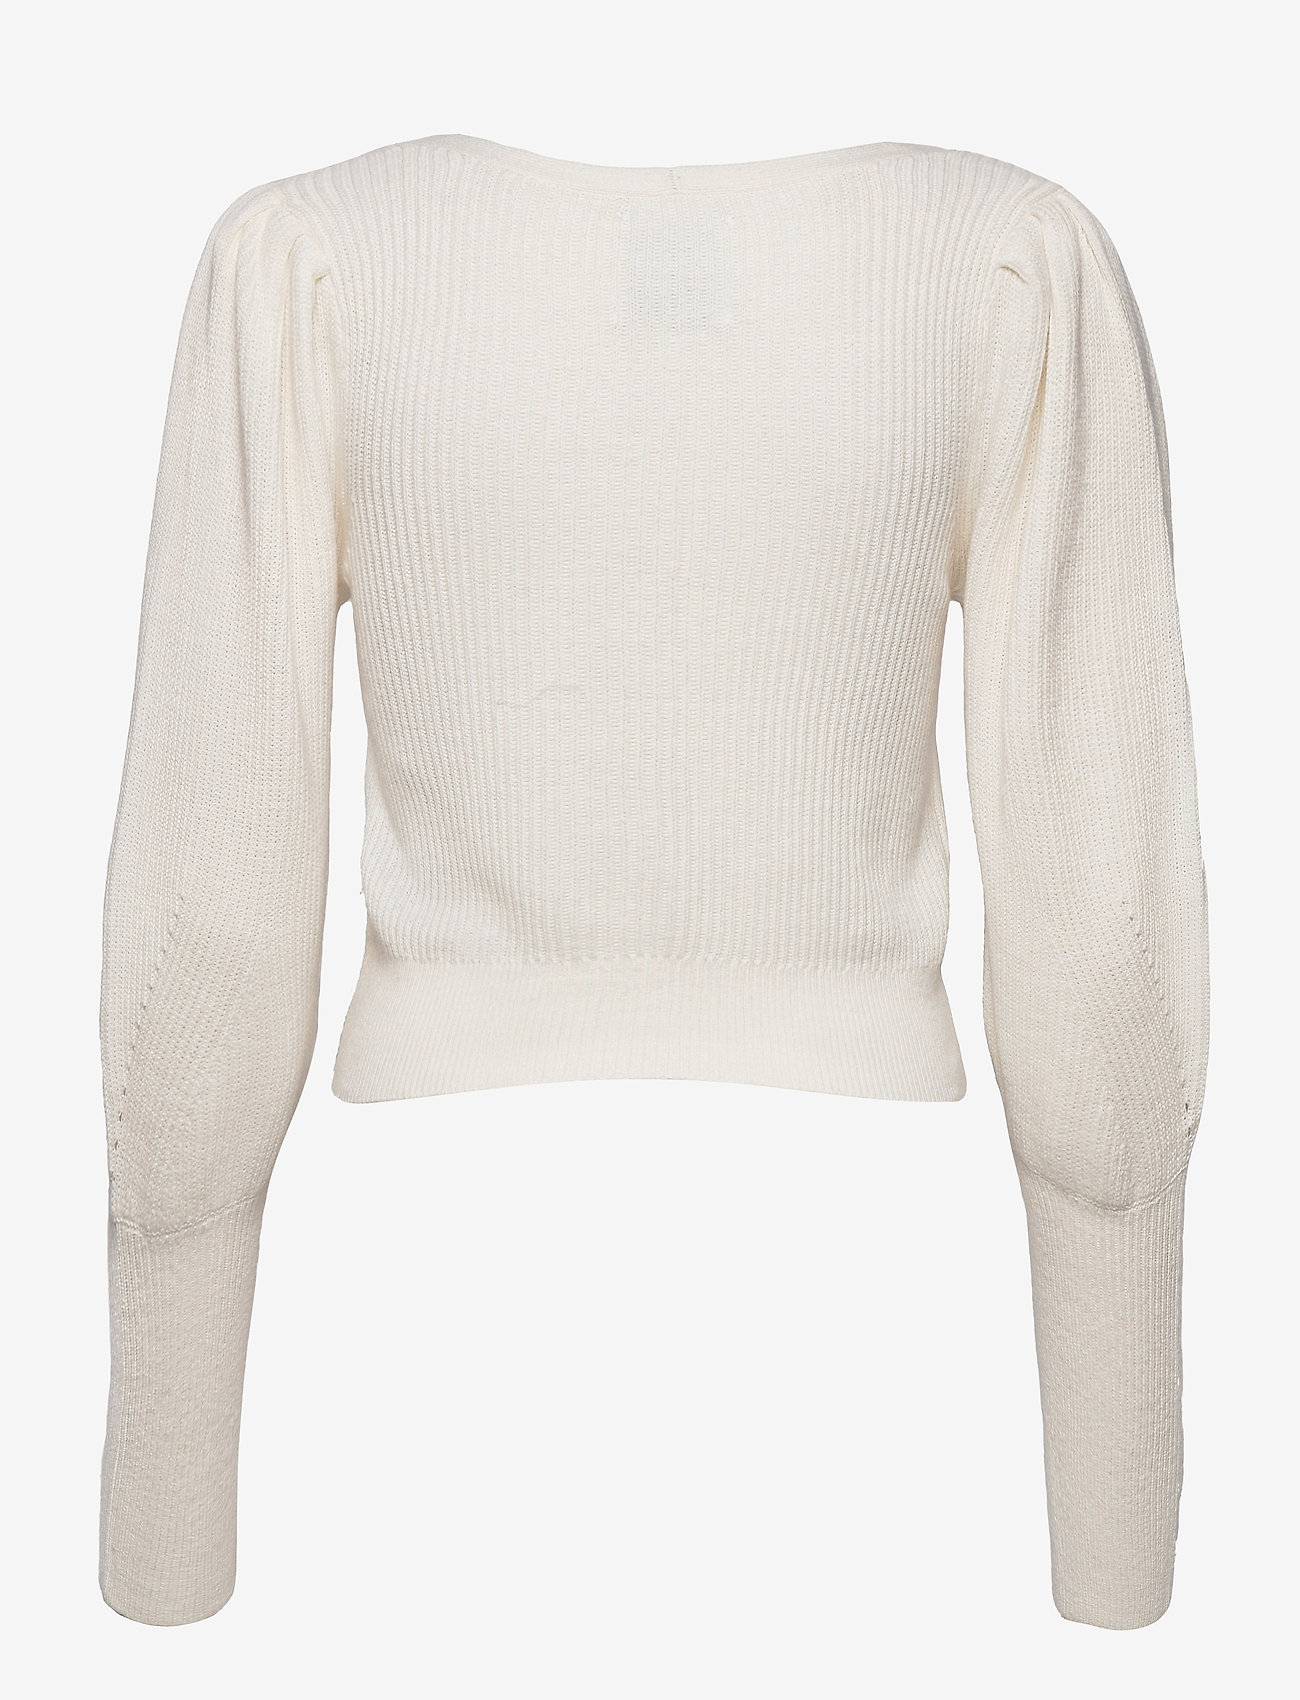 abercrombie & fitch sweaters womens